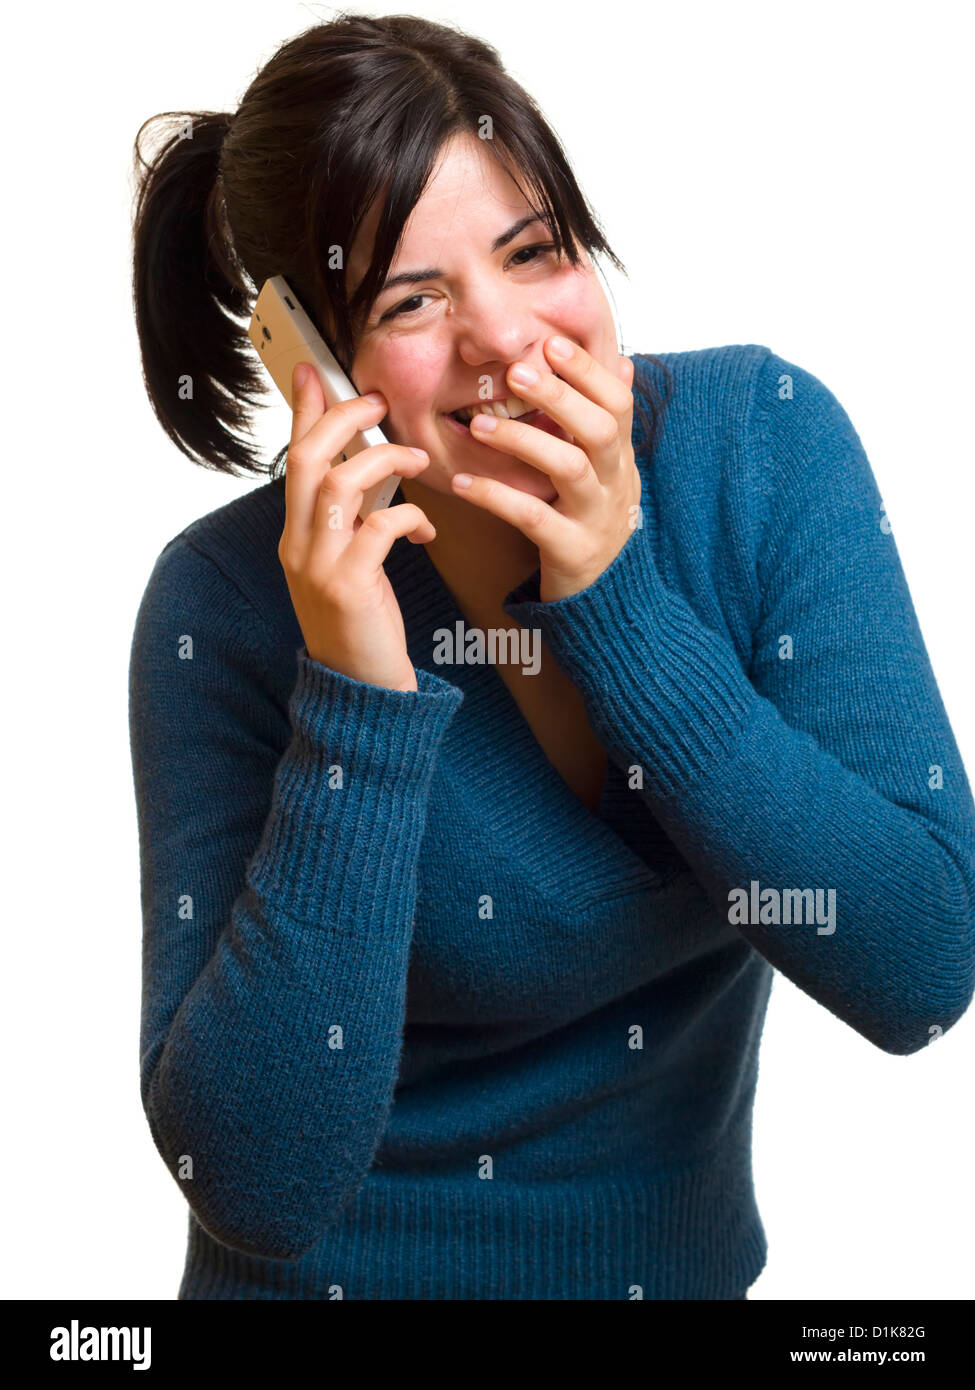 Young woman talking on mobile phone and giggling Stock Photo